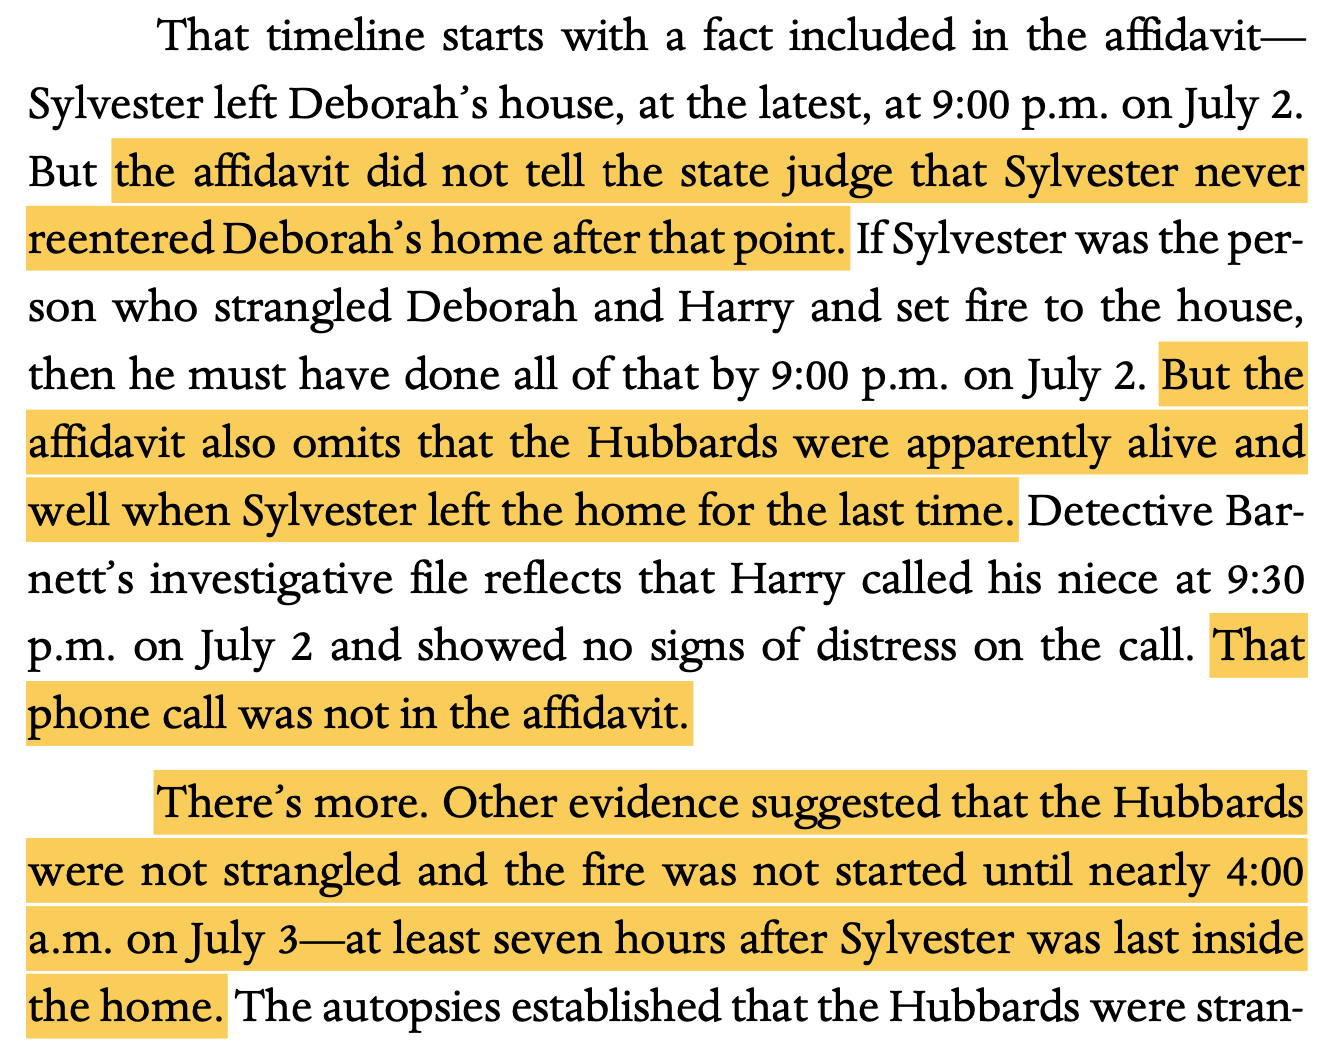 That timeline starts with a fact included in the affidavit— Sylvester left Deborah’s house, at the latest, at 9:00 p.m. on July 2. But the affidavit did not tell the state judge that Sylvester never reentered Deborah’s home after that point. If Sylvester was the per- son who strangled Deborah and Harry and set fire to the house, then he must have done all of that by 9:00 p.m. on July 2. But the affidavit also omits that the Hubbards were apparently alive and well when Sylvester left the home for the last time. Detective Bar- nett’s investigative file reflects that Harry called his niece at 9:30 p.m. on July 2 and showed no signs of distress on the call. That phone call was not in the affidavit. There’s more. Other evidence suggested that the Hubbards were not strangled and the fire was not started until nearly 4:00 a.m. on July 3—at least seven hours after Sylvester was last inside the home.